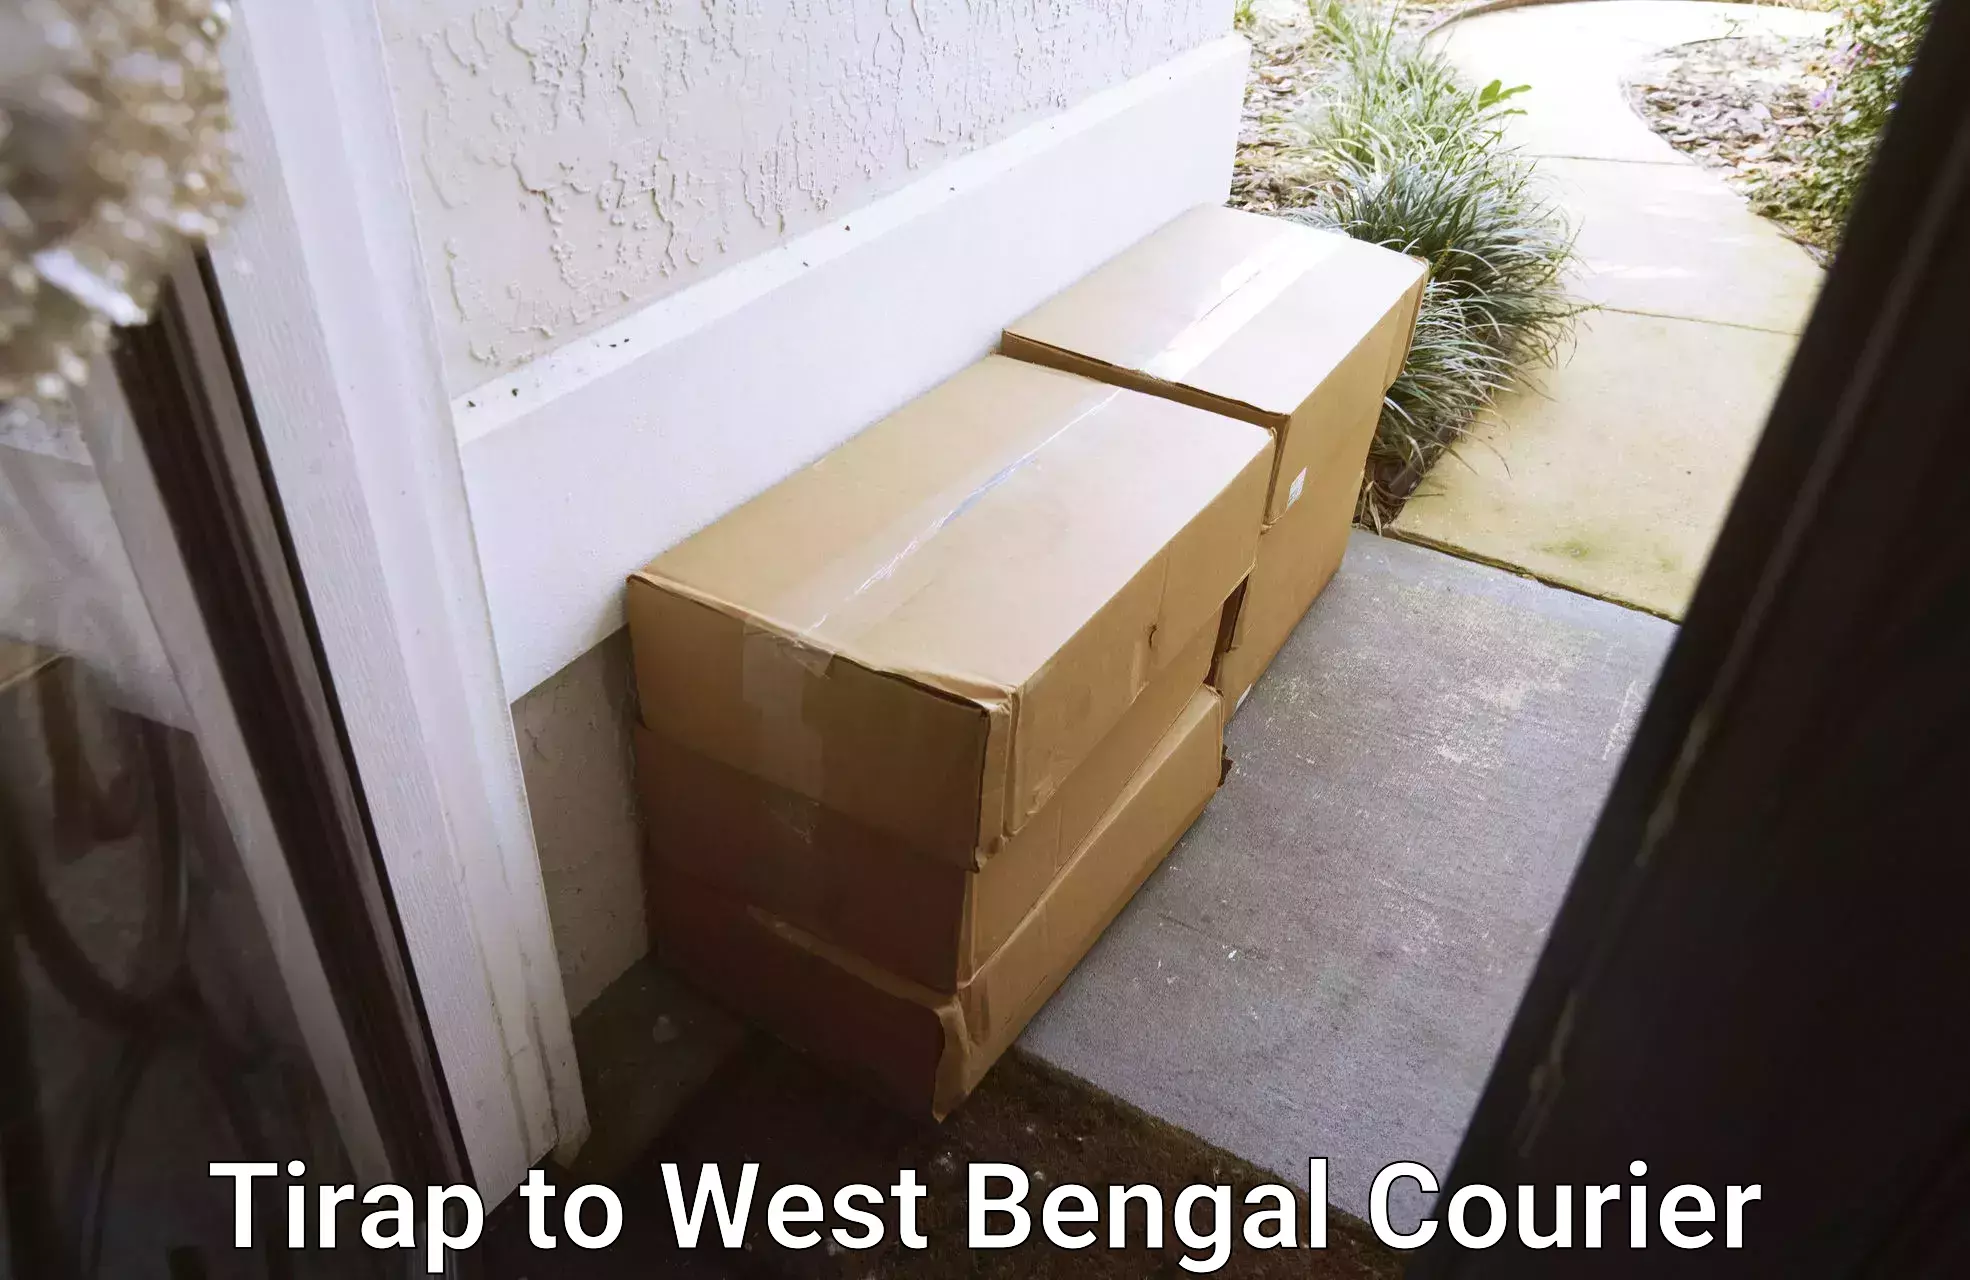 24-hour courier service Tirap to West Bengal